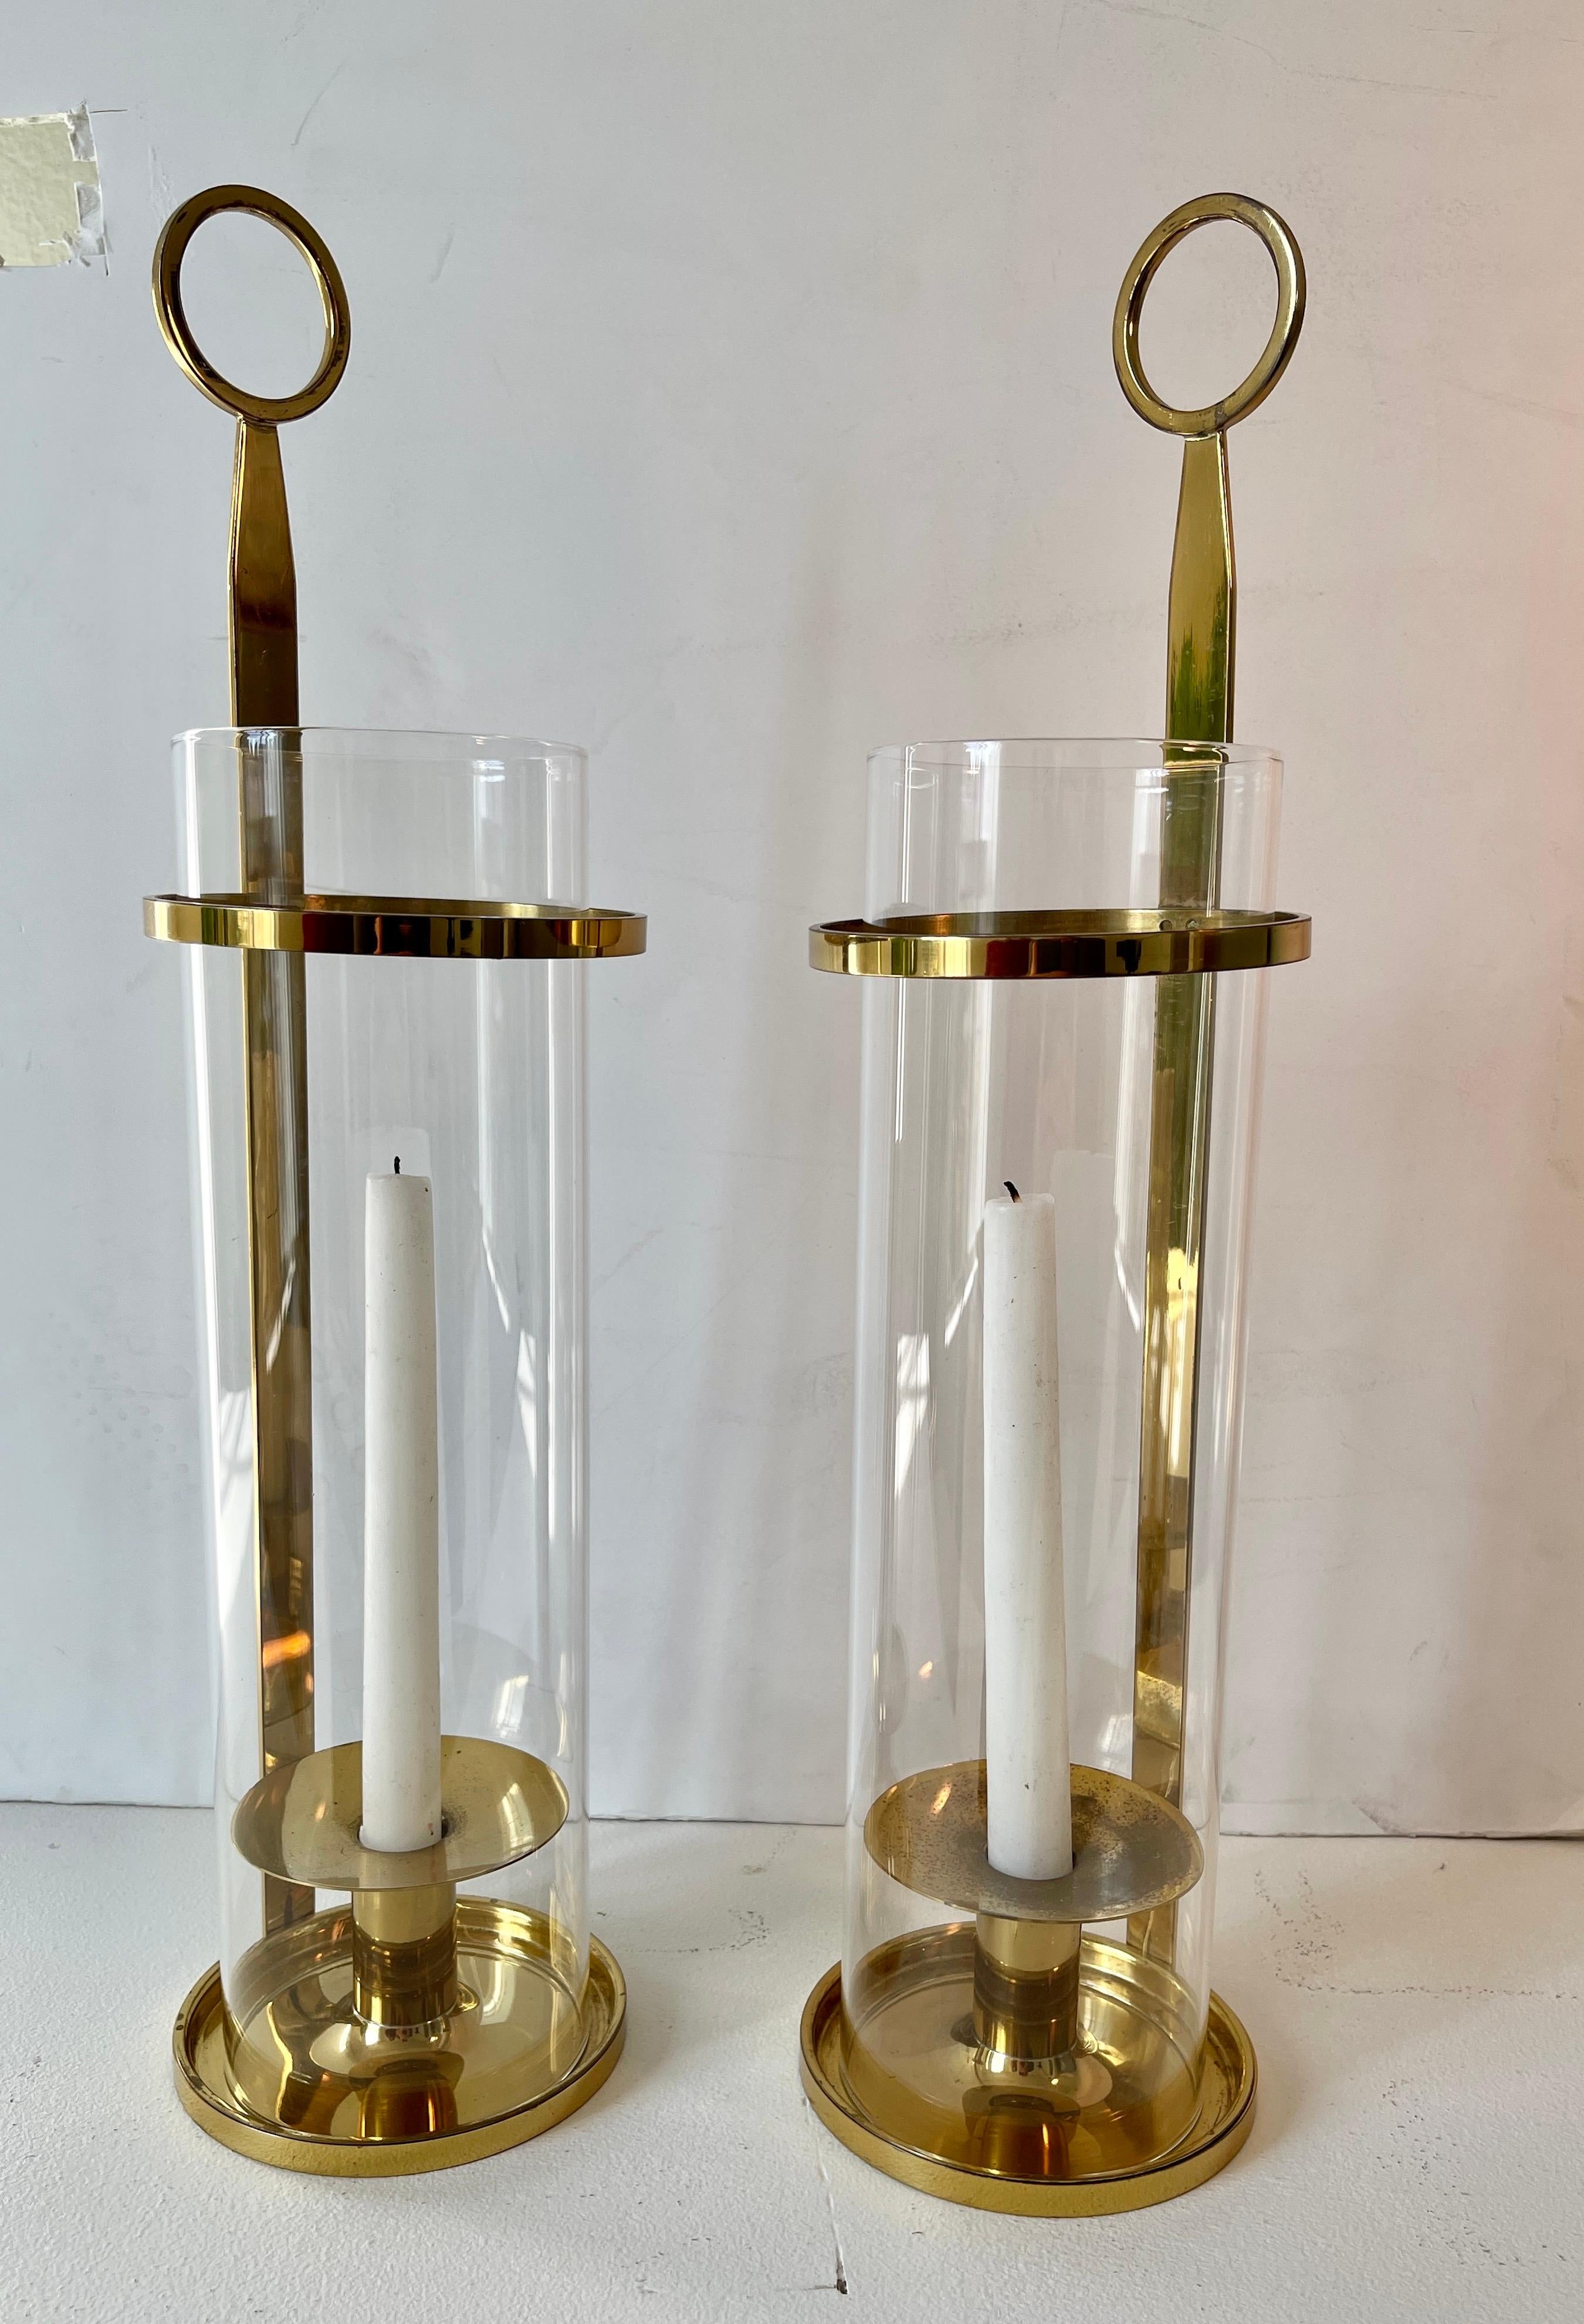 American Tommi Parzinger           (1901 - 1981) Pair of Brass and Glass Candle Holders 